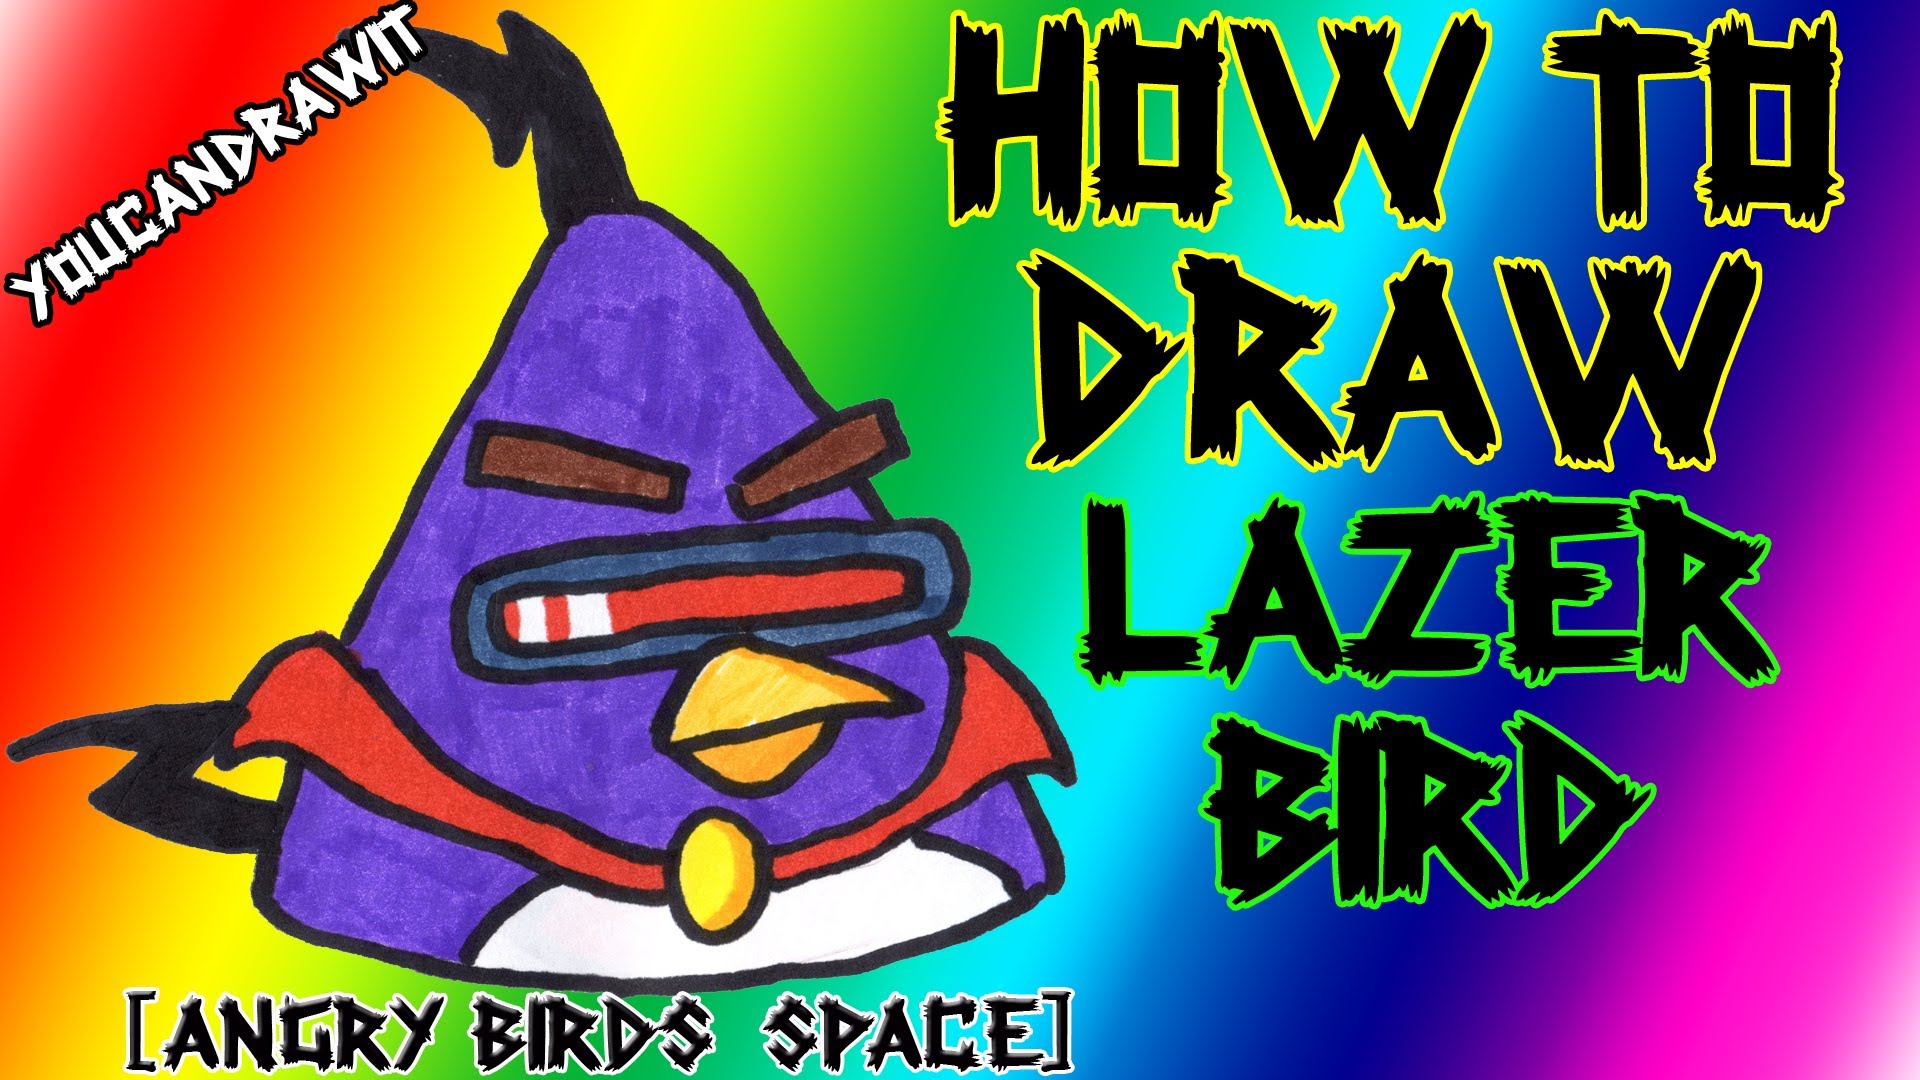 1920x1080 How To Draw Space Lazer Bird From Angry Birds Space.